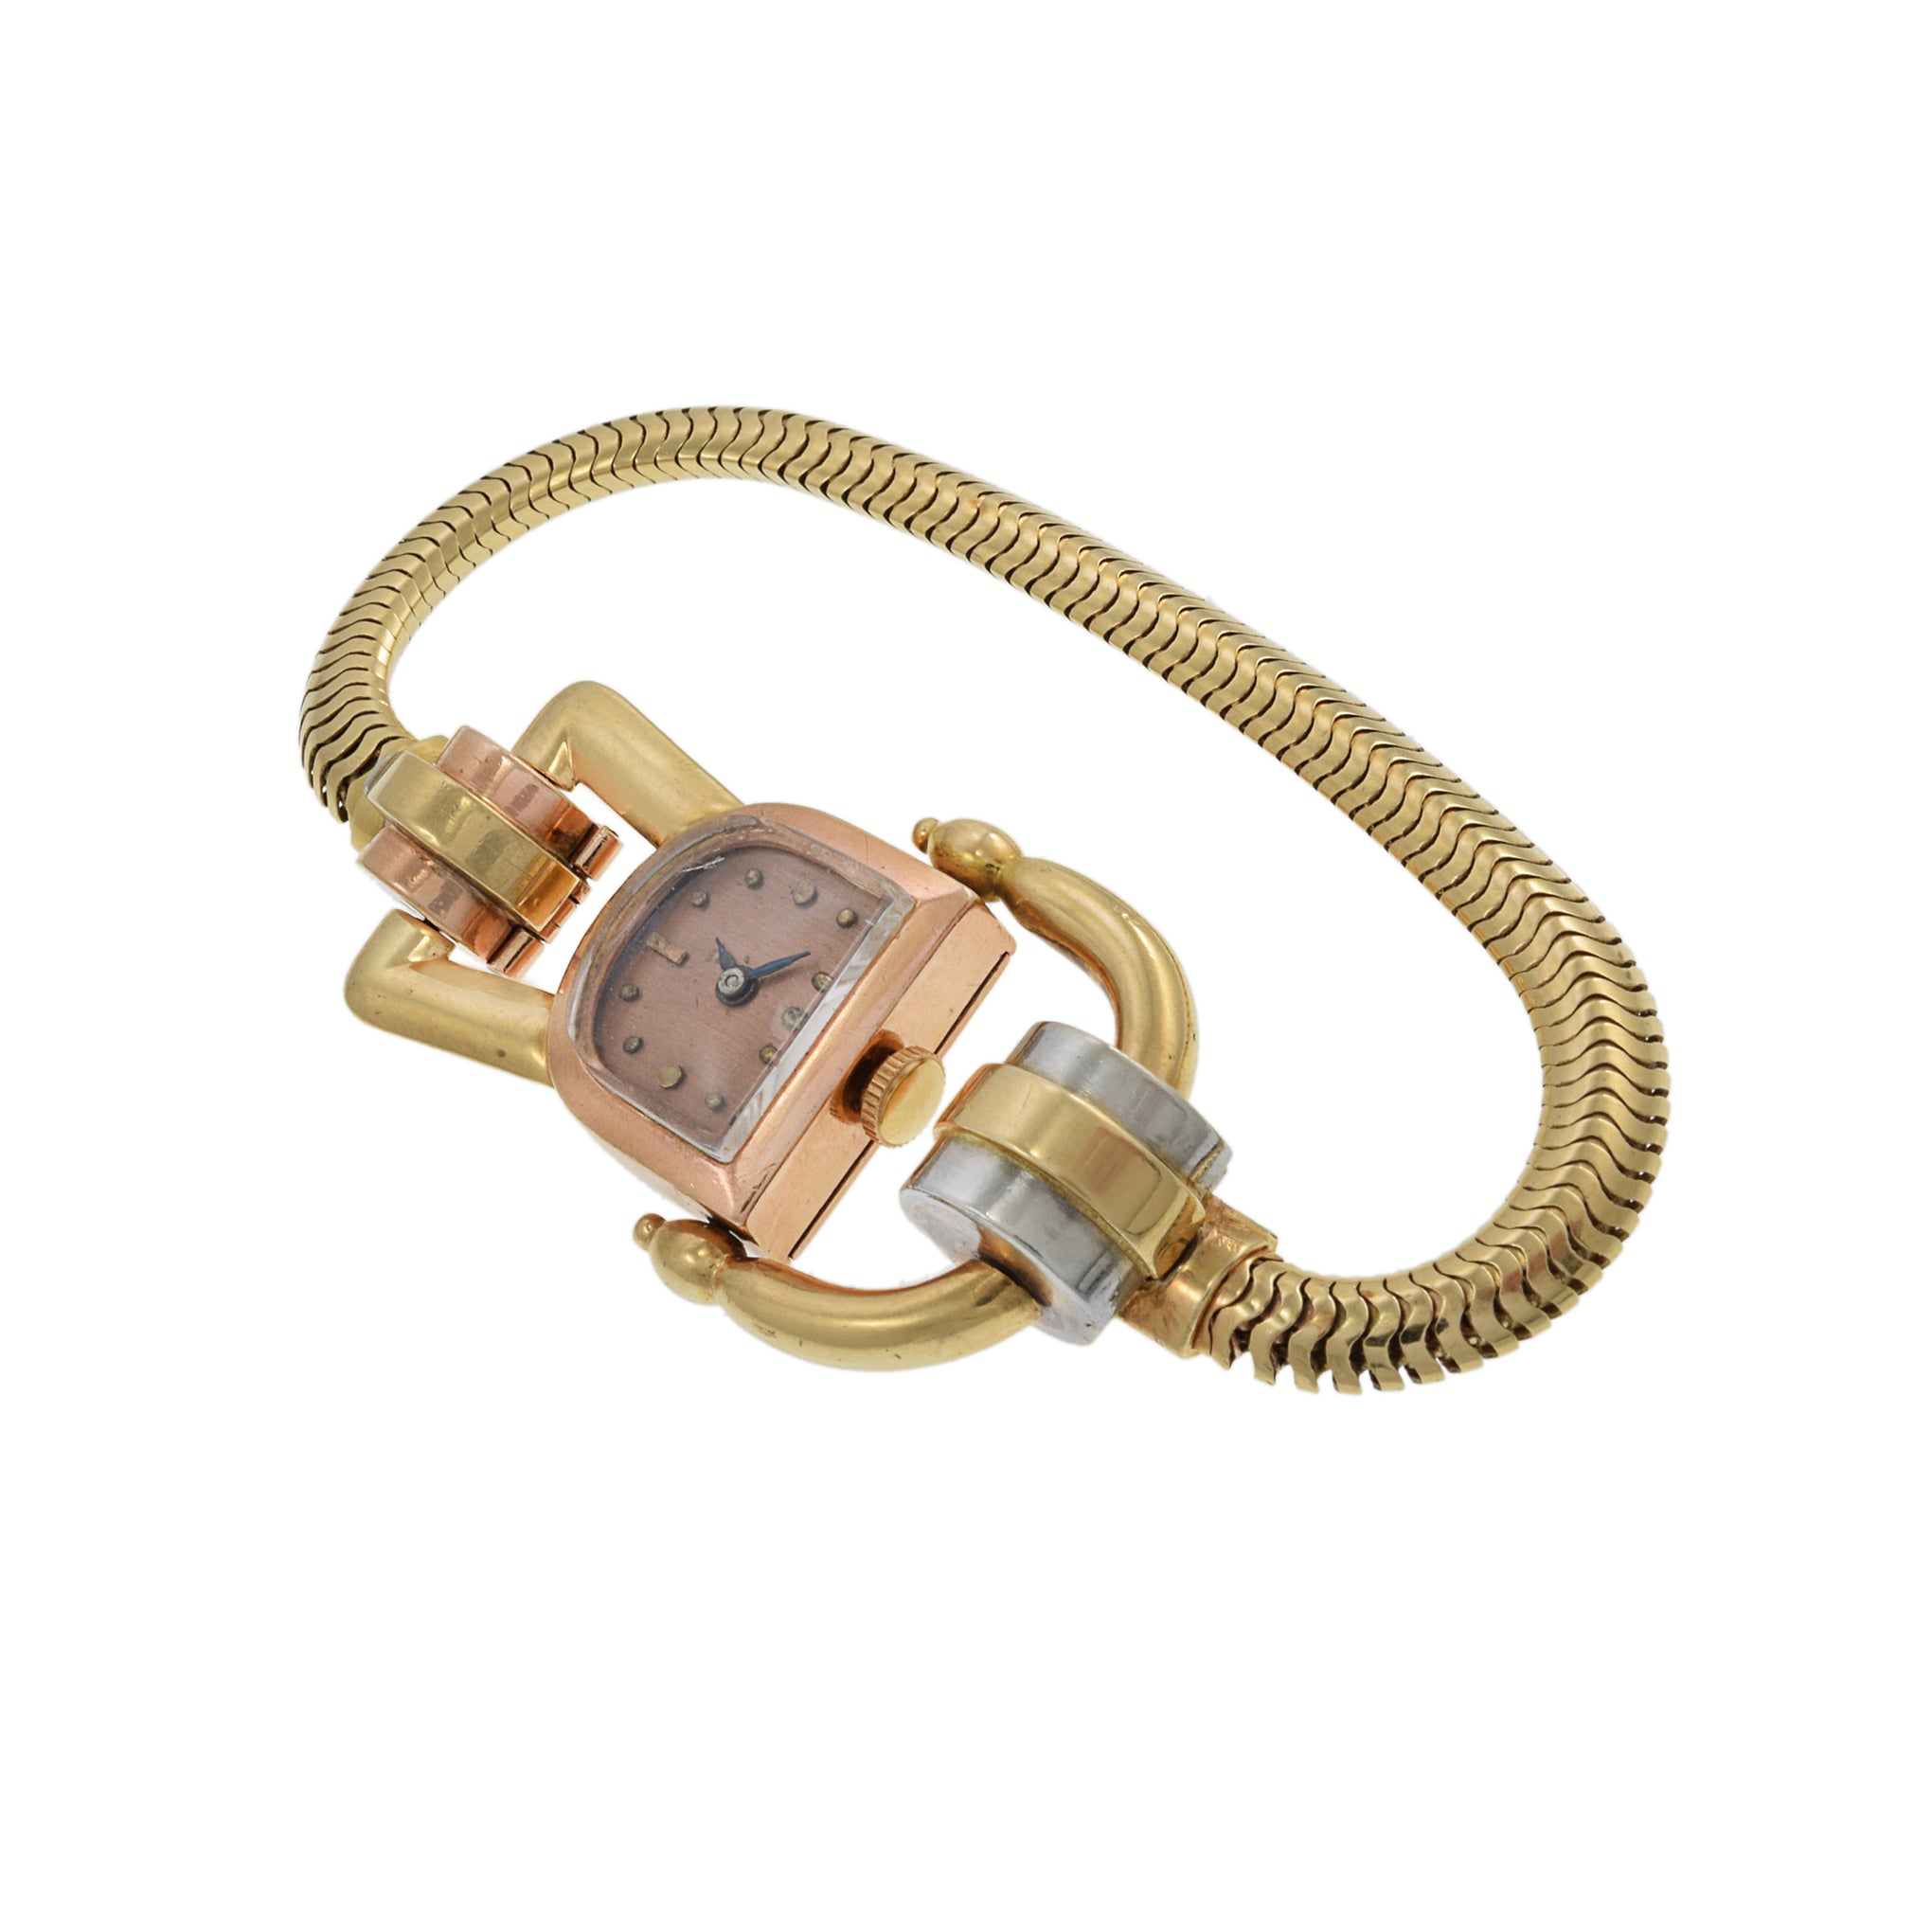 Jos Boillat Tri Color 18K Gold Manual Wind Cocktail Watch